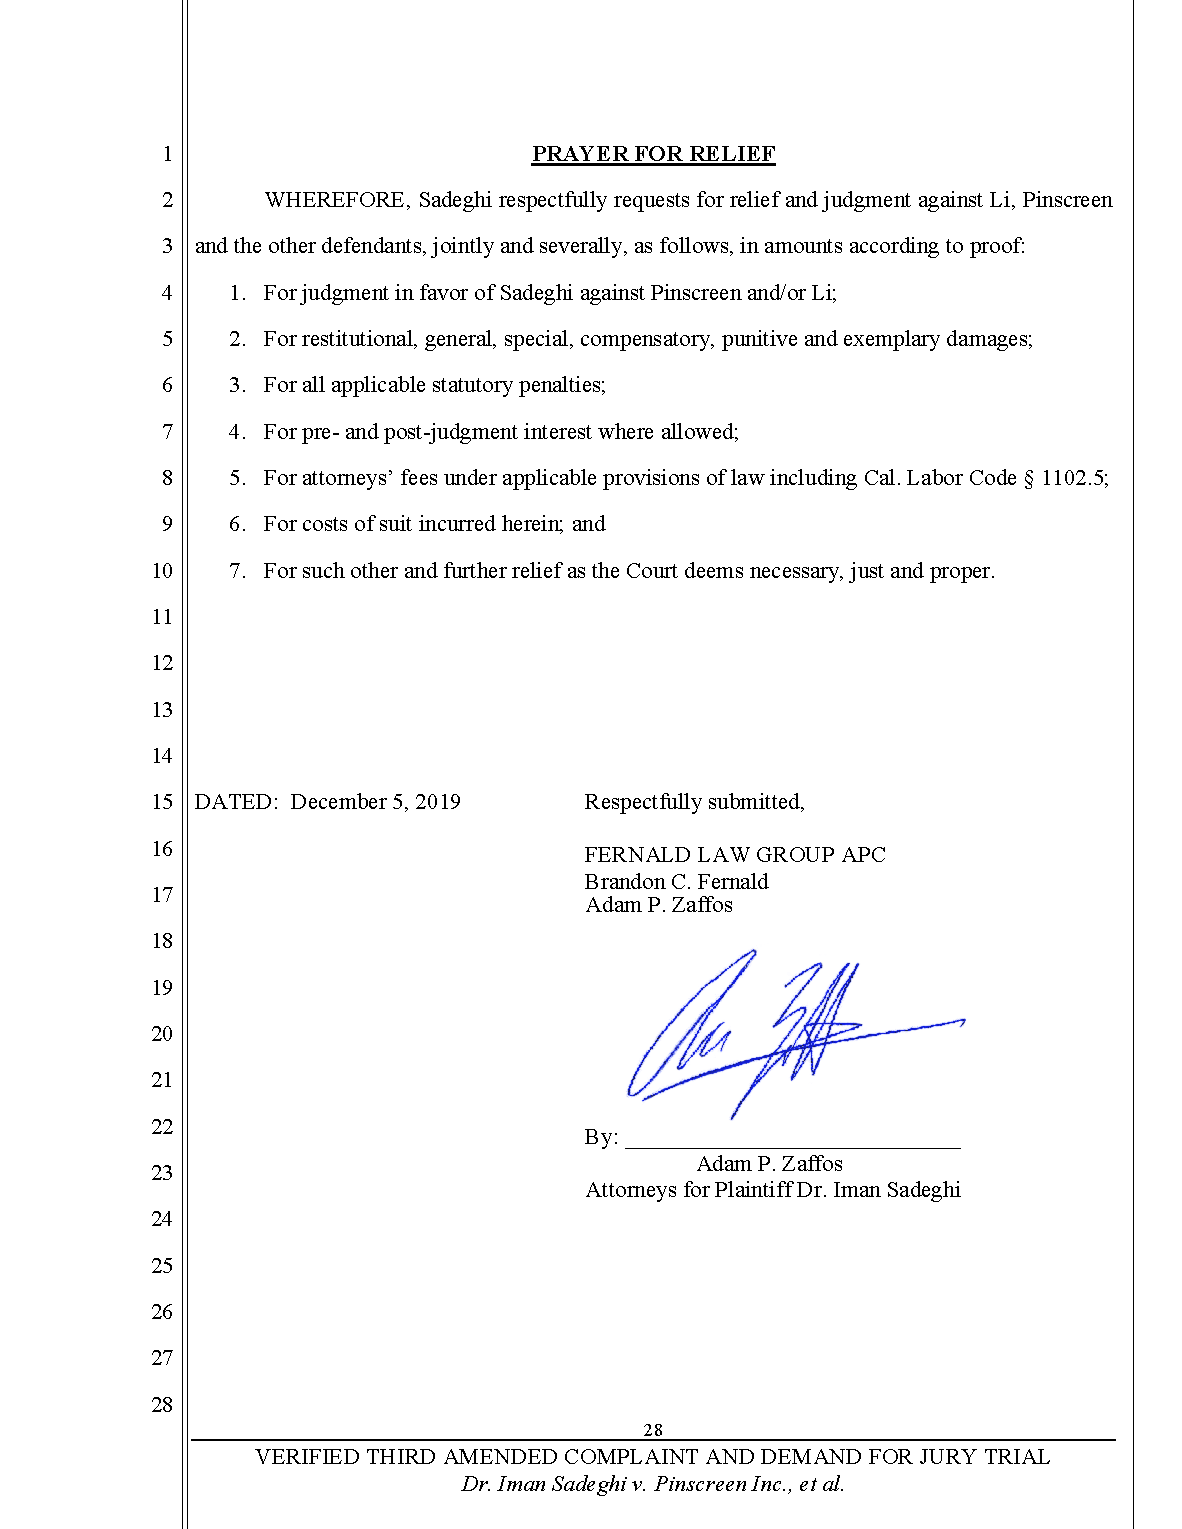 Third Amended Complaint (TAC) Page 29